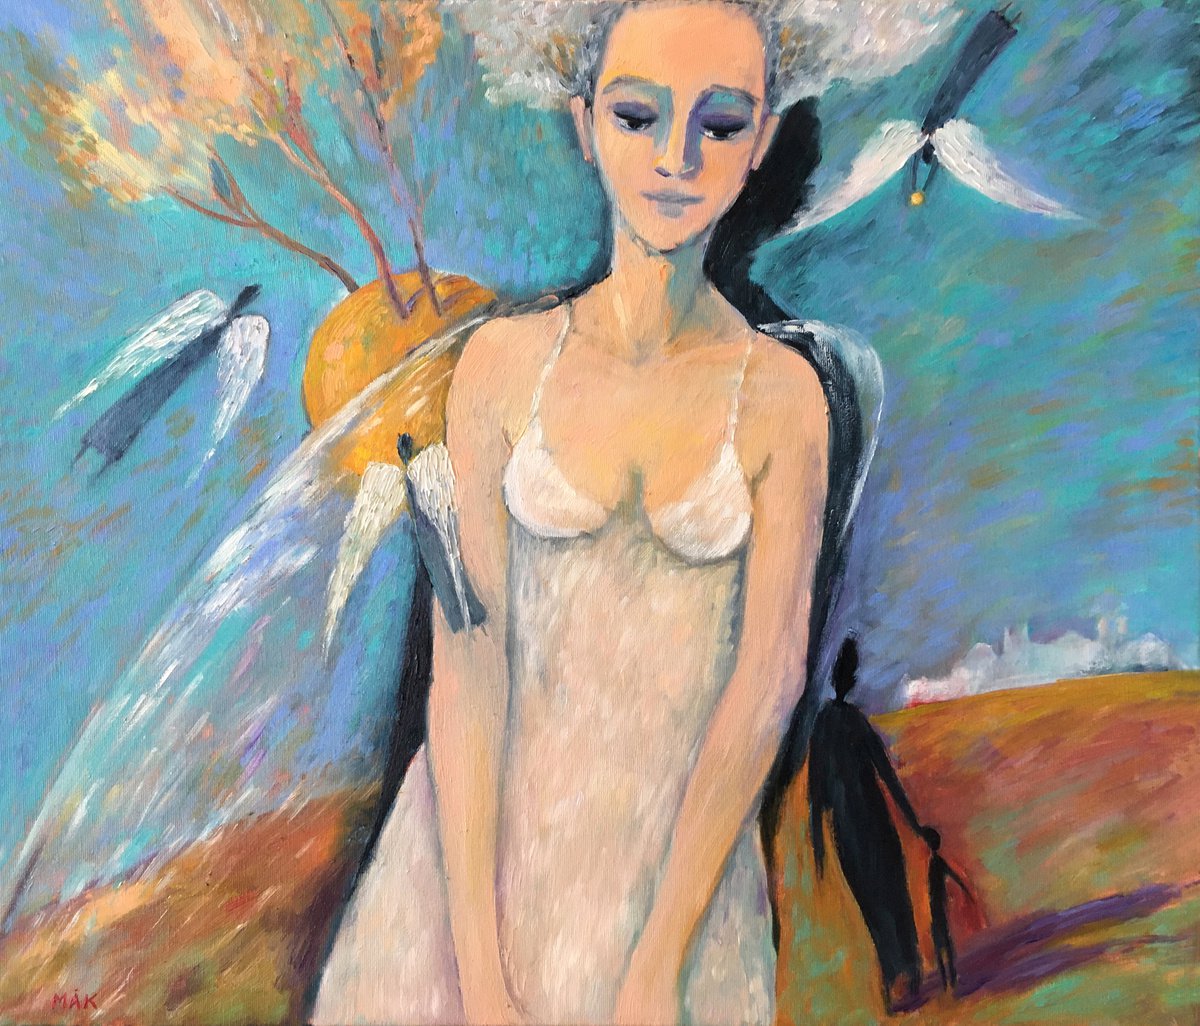 PSYCHE AT WORK - fantasy painting with angel girl with wings in the cerulean blue sky by Irene Makarova